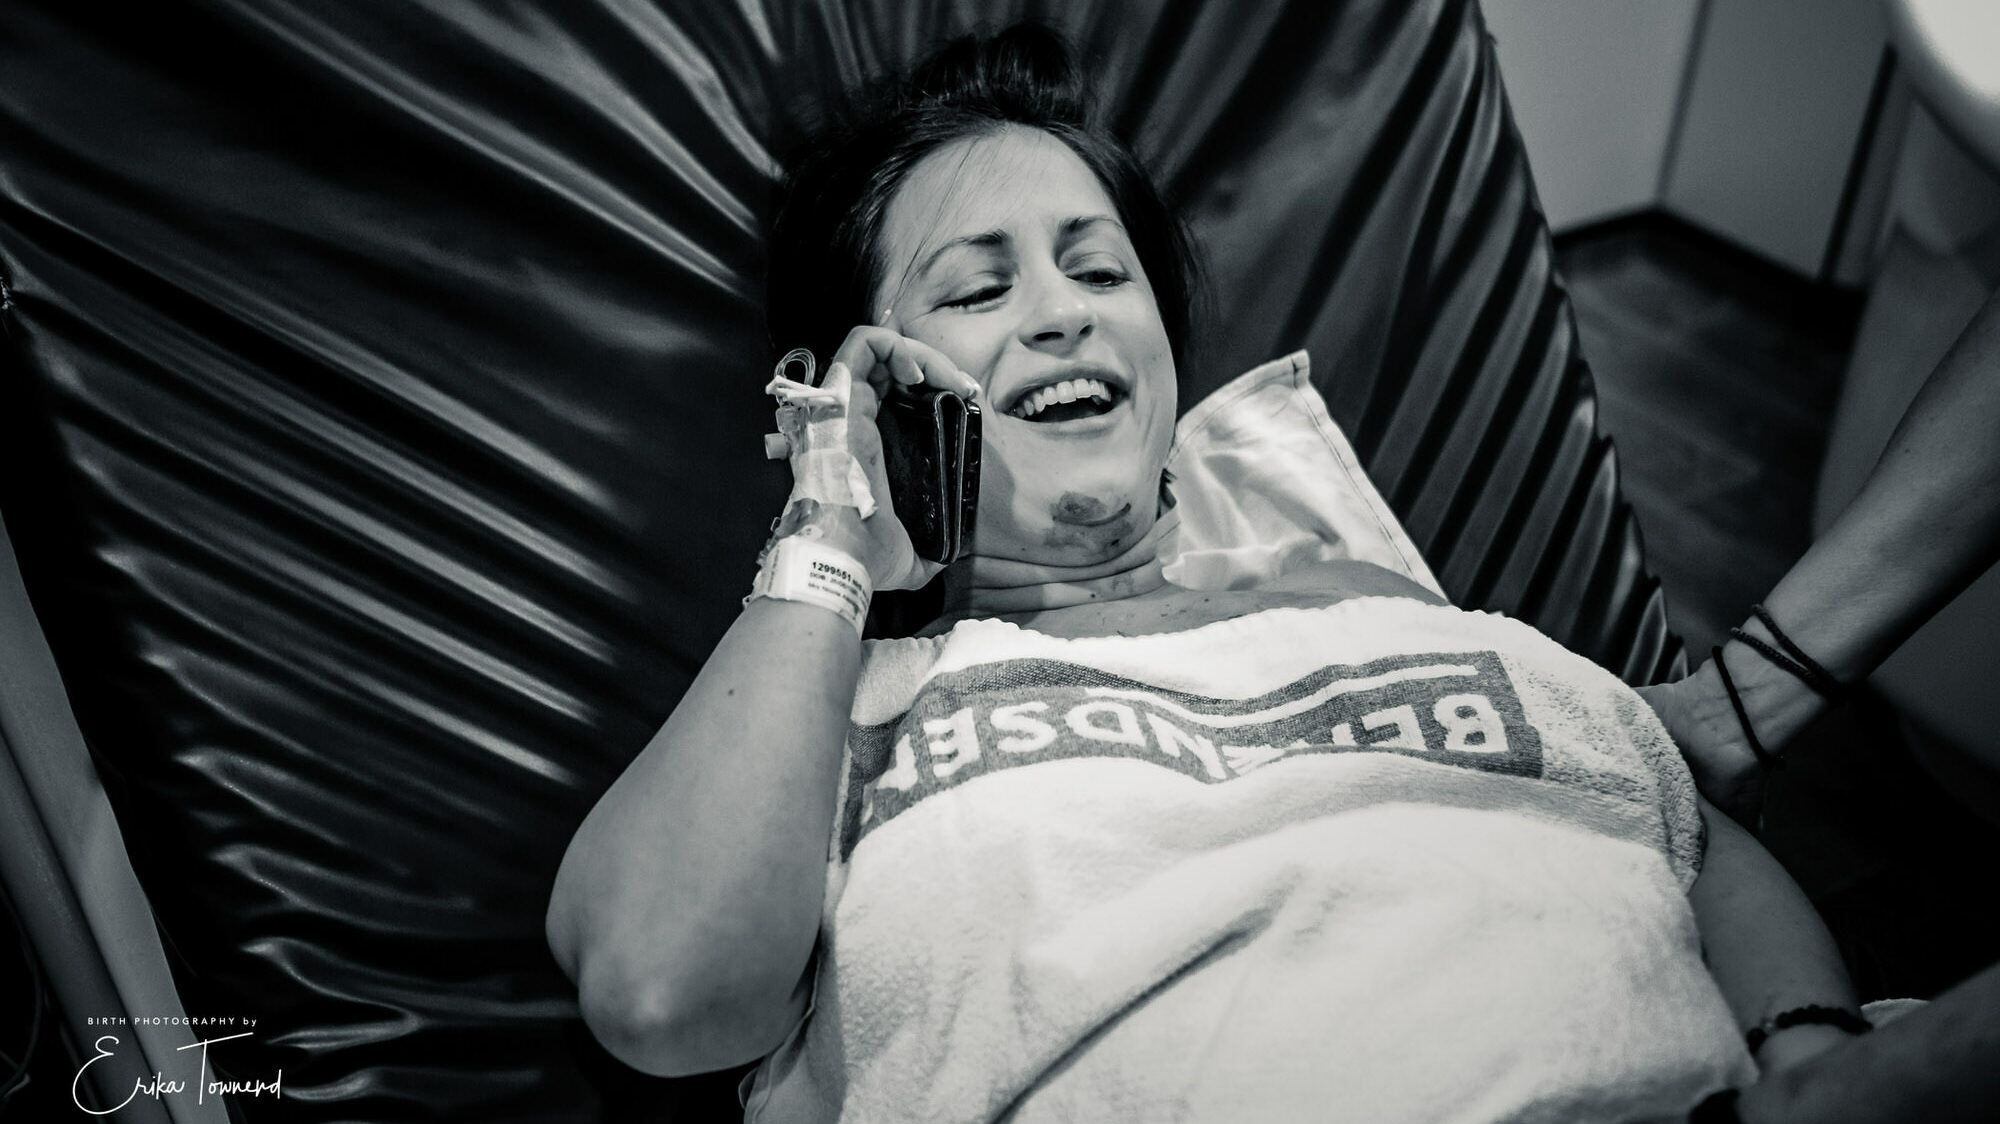 Erika Townend Birth photography in black and white a mother sharing her news of the birth of her baby